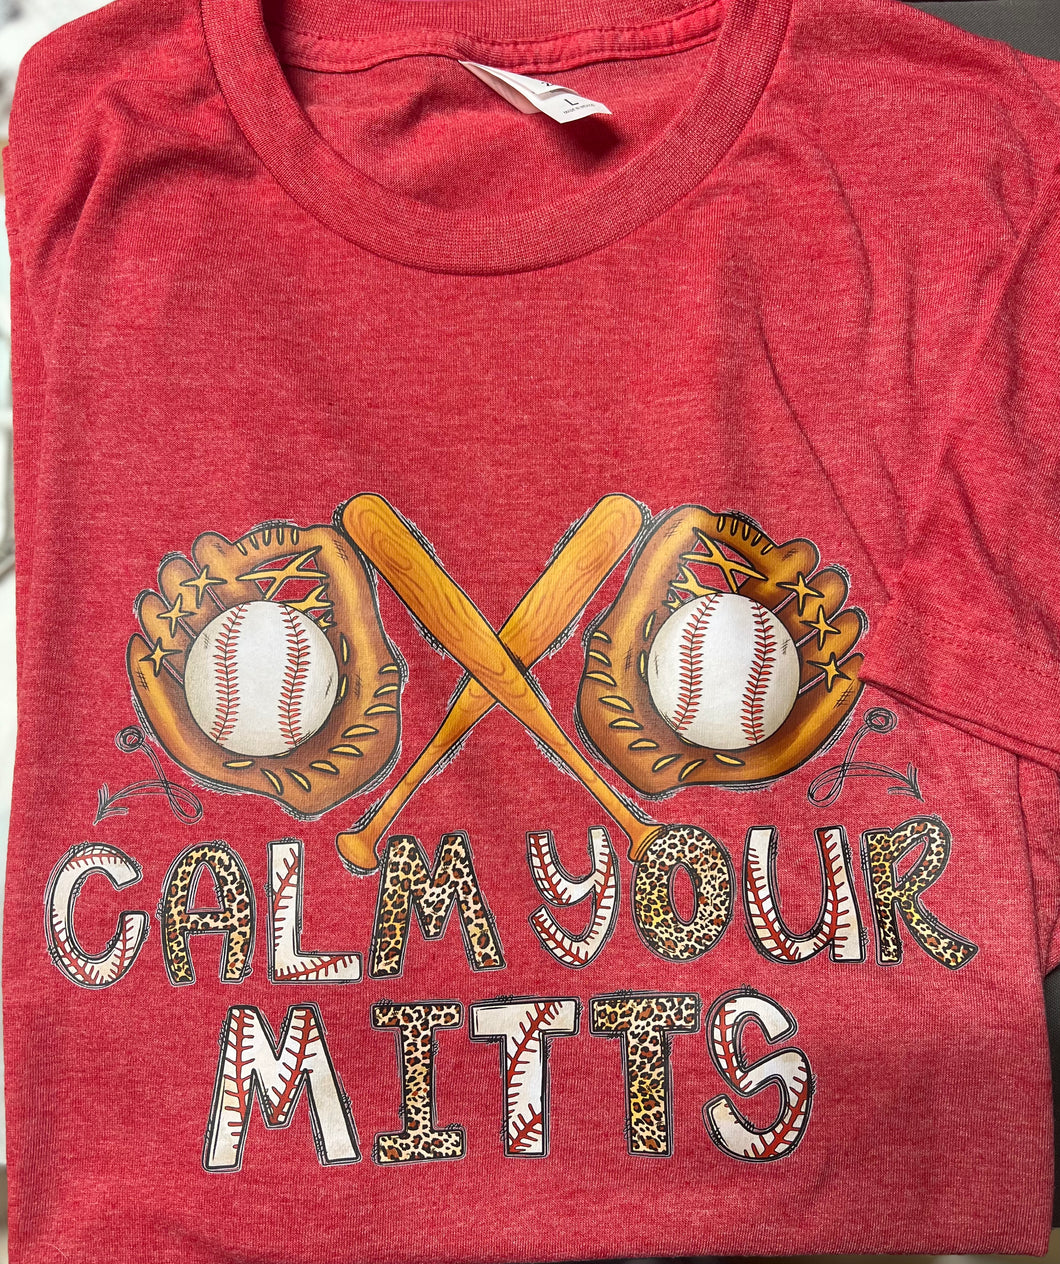 Calm Your Mitts Graphic Tee